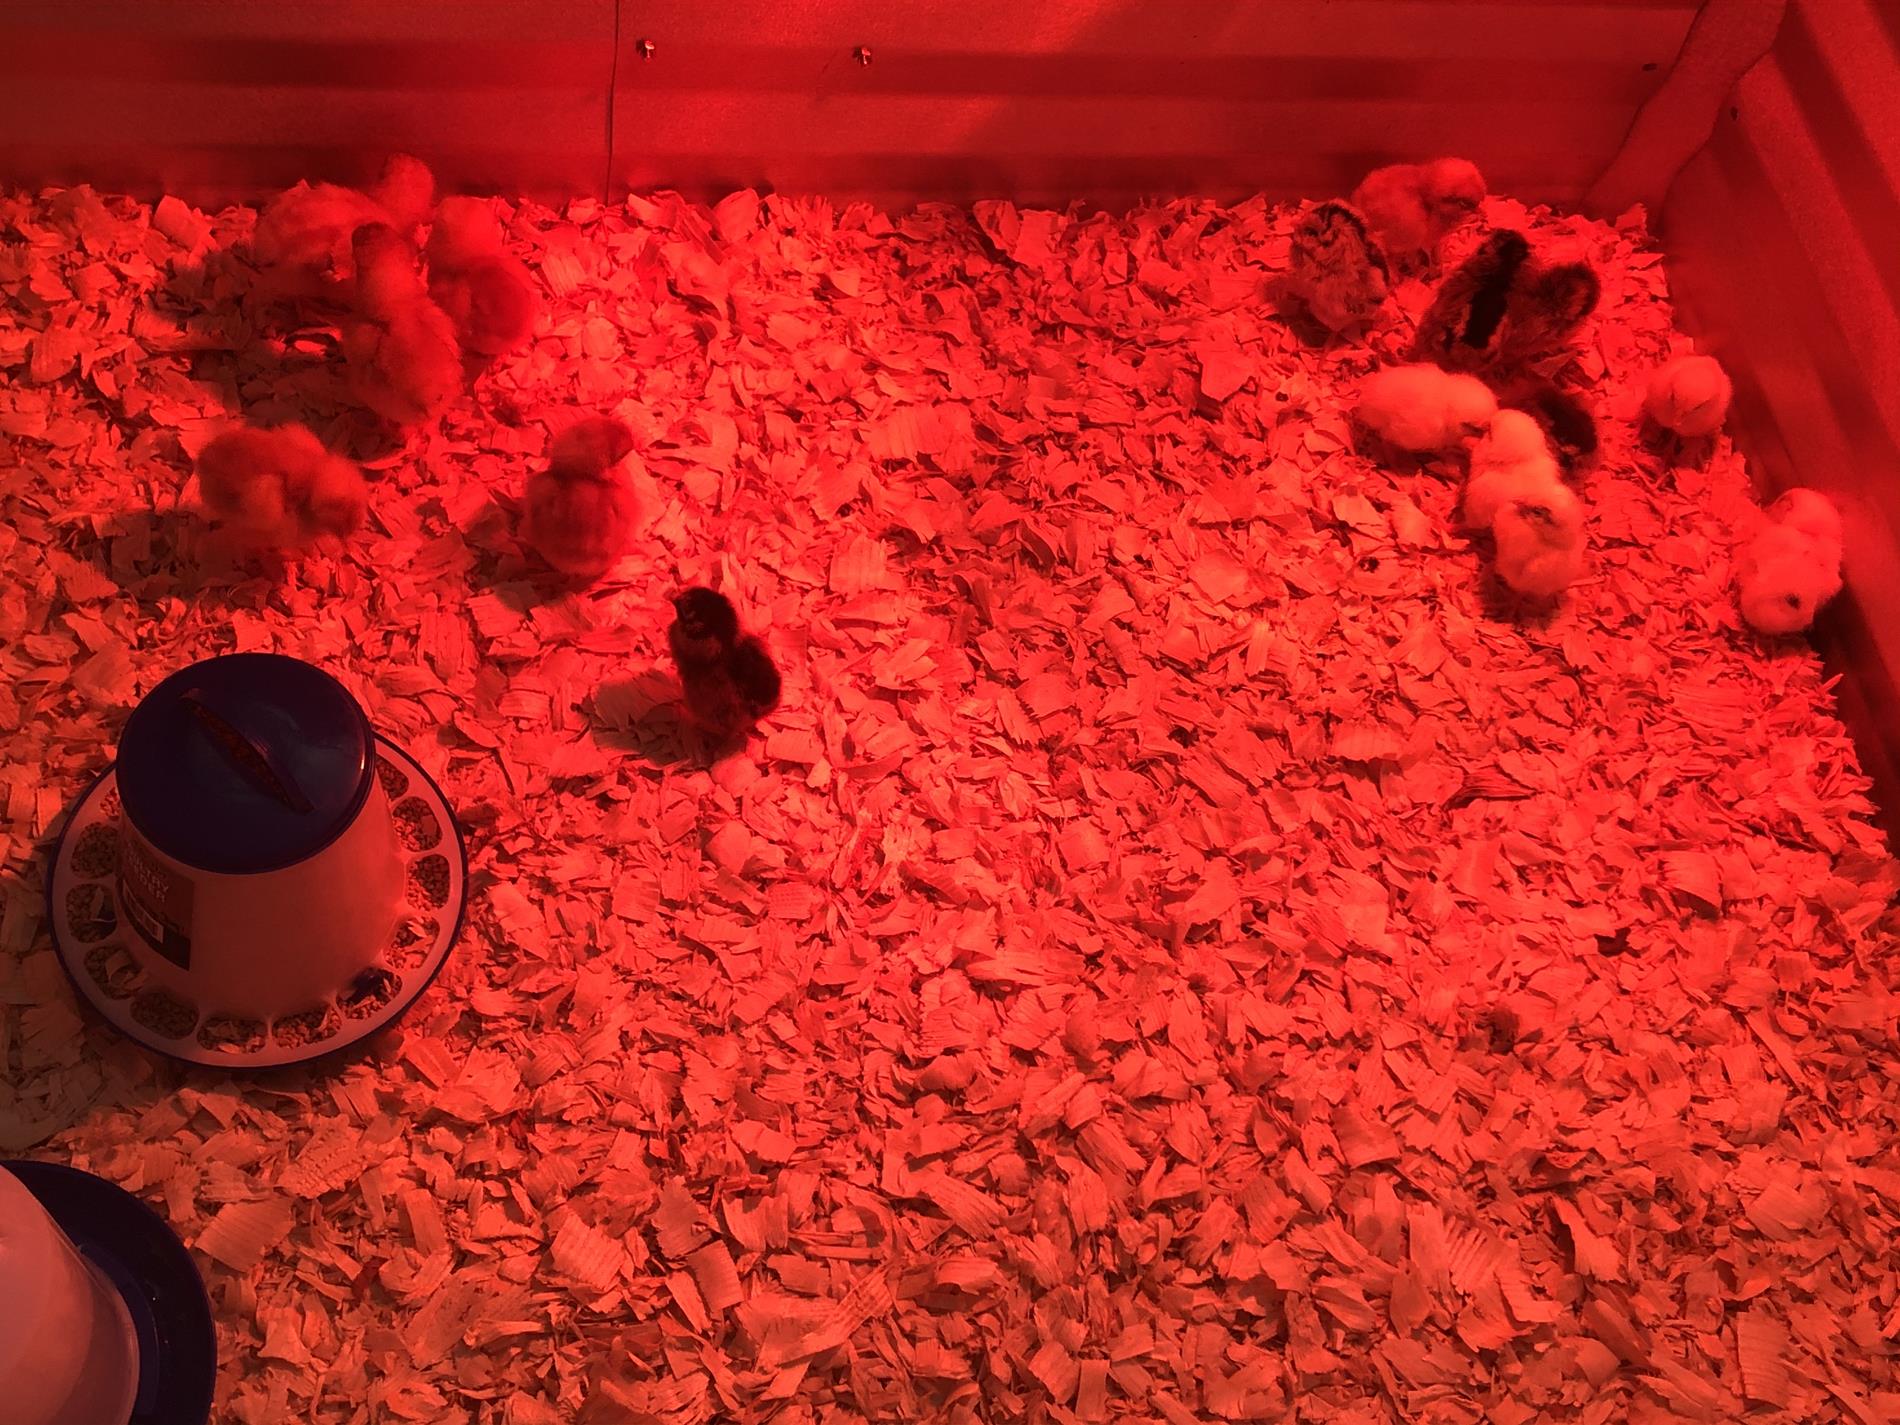 Taking Care of Baby Chicks In a Red Lit Up Area 